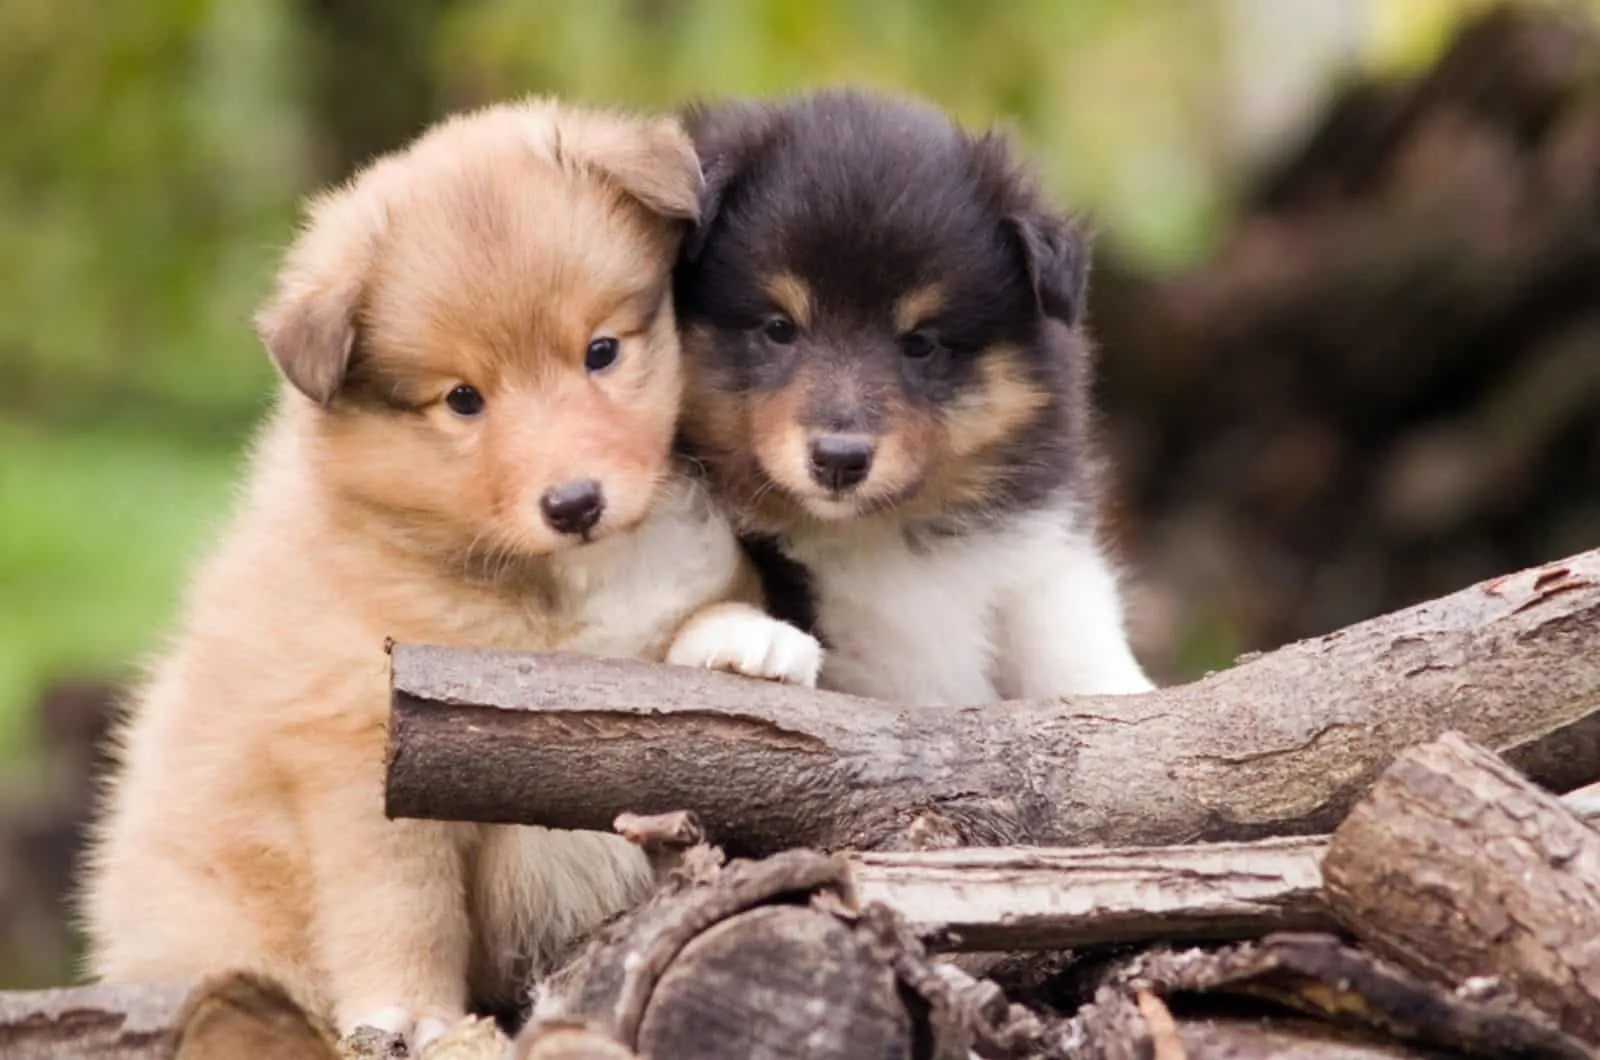 two cute shetland sheepdog puppies sitting together